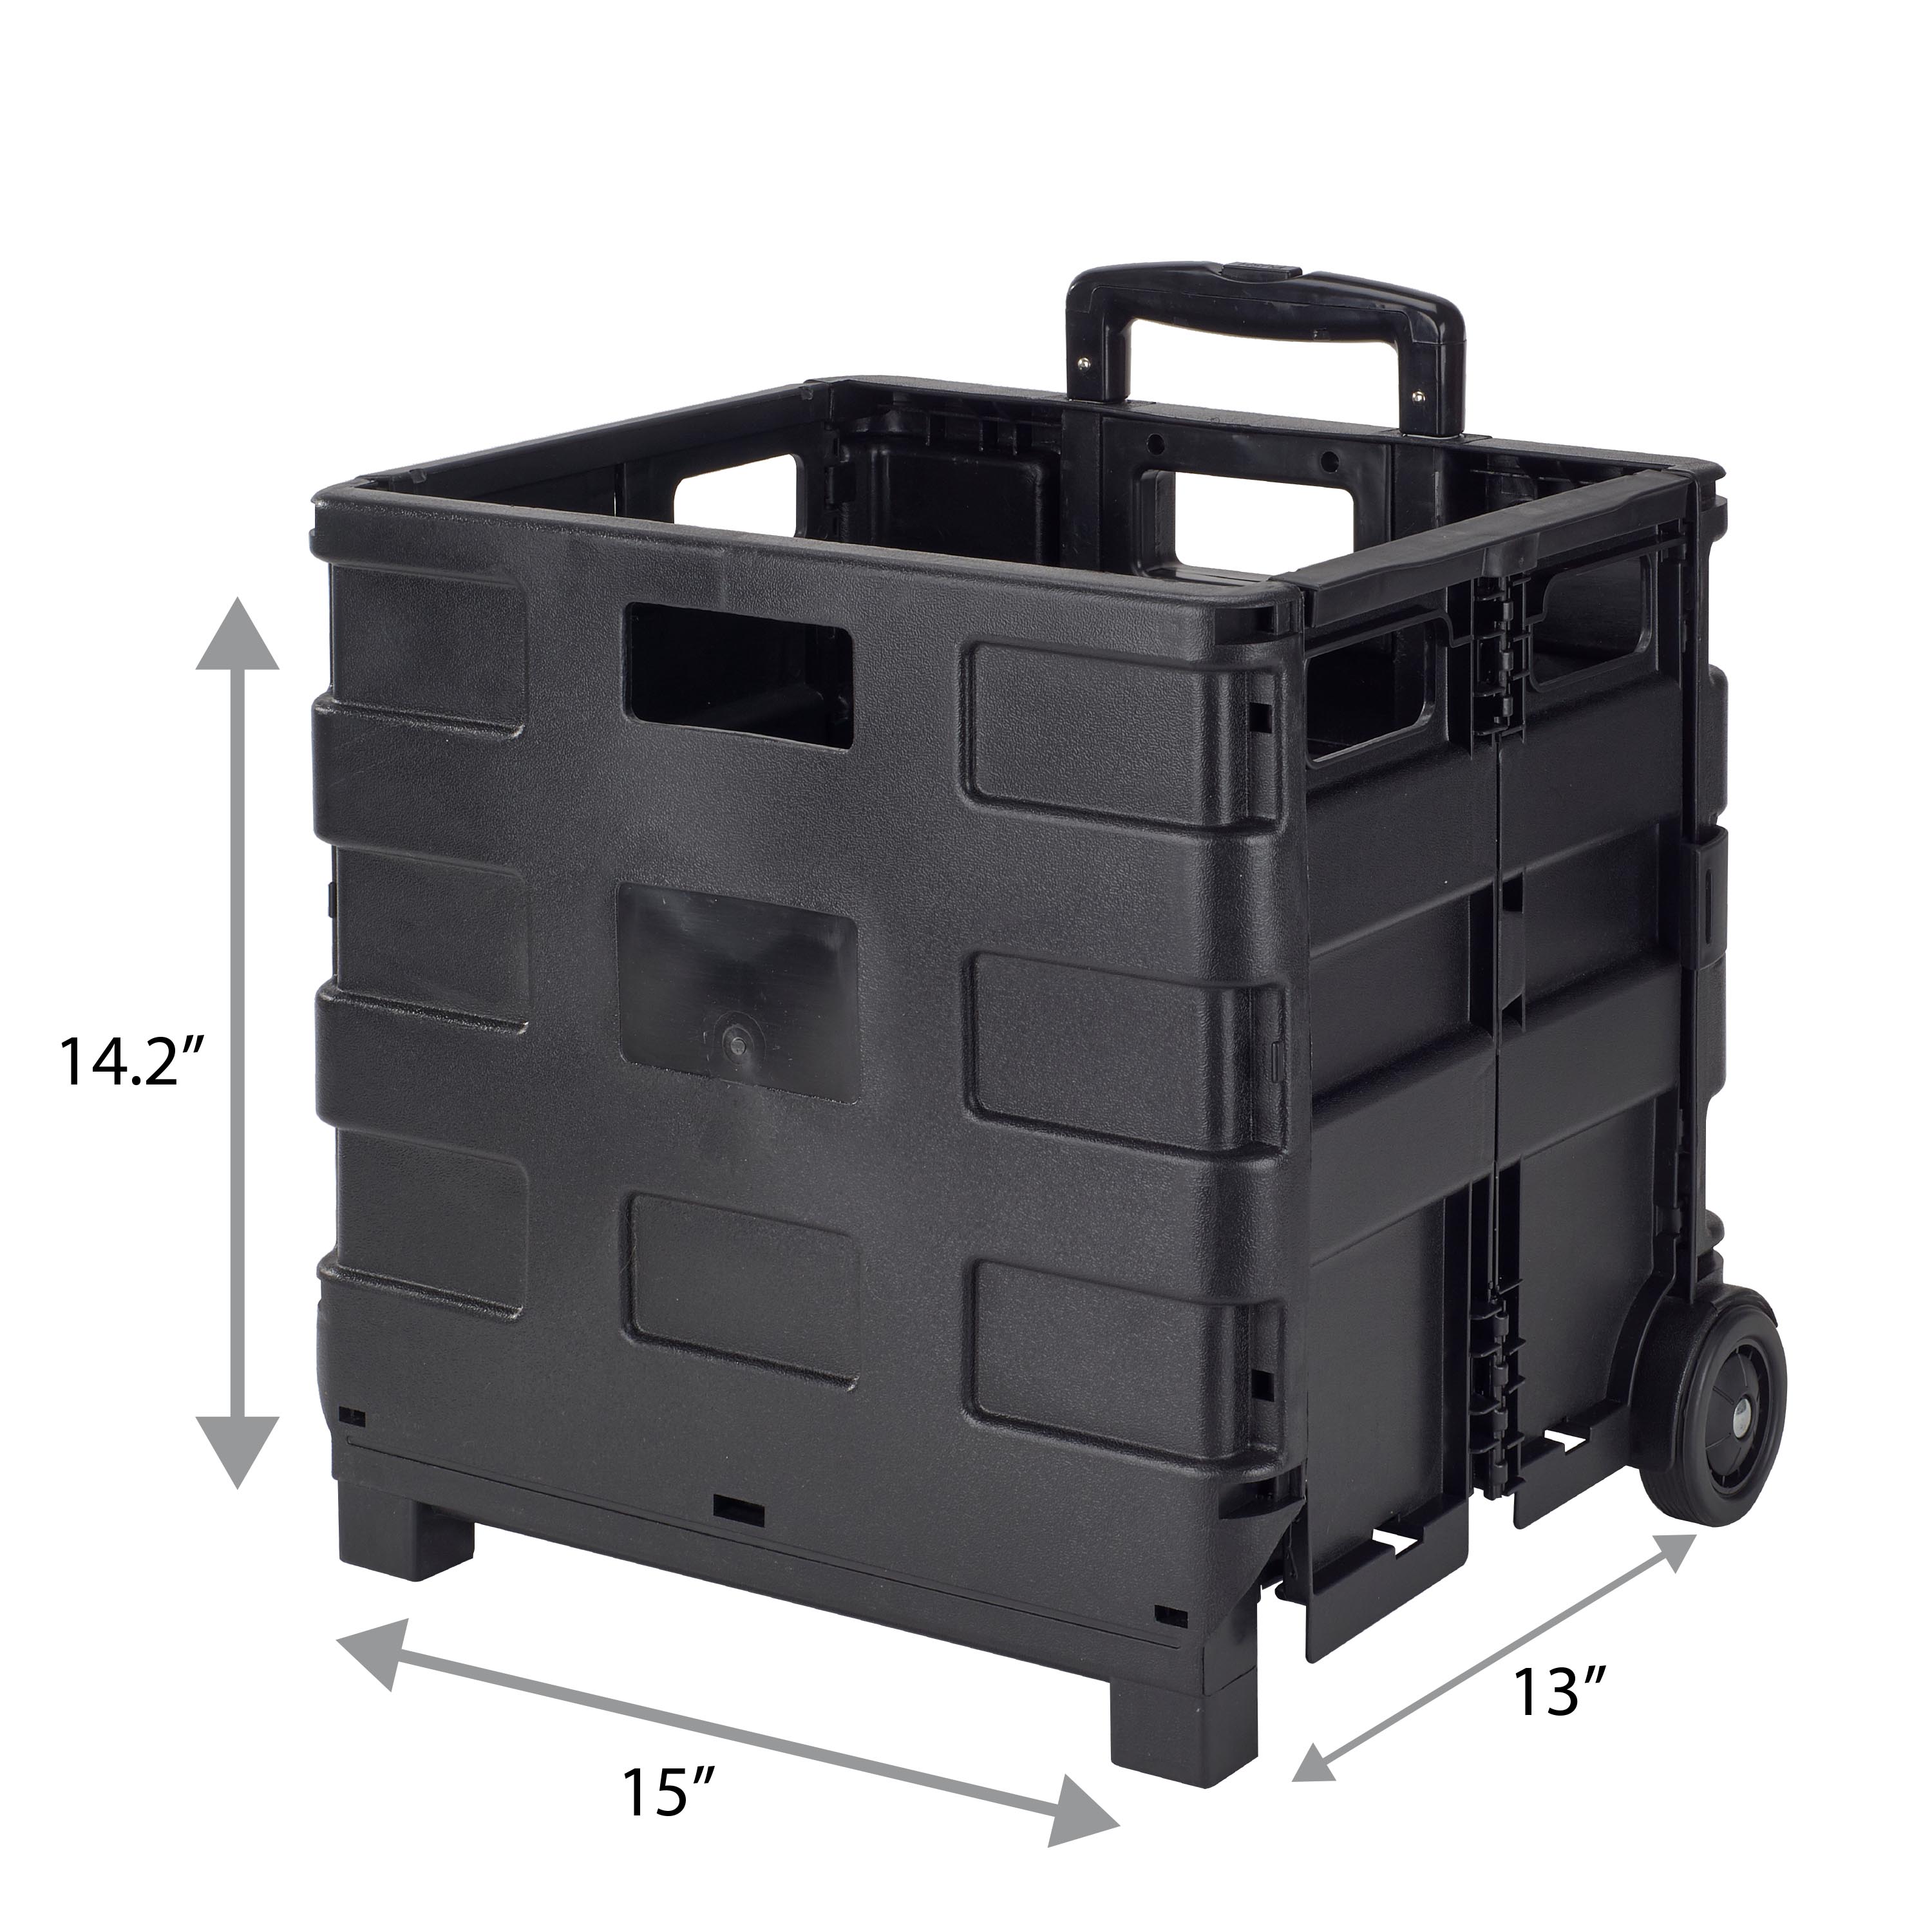 Simplify Tote Bin Collapsible Utility Cart, Plastic, Black, 15" x 13" x 14.2" - image 5 of 9